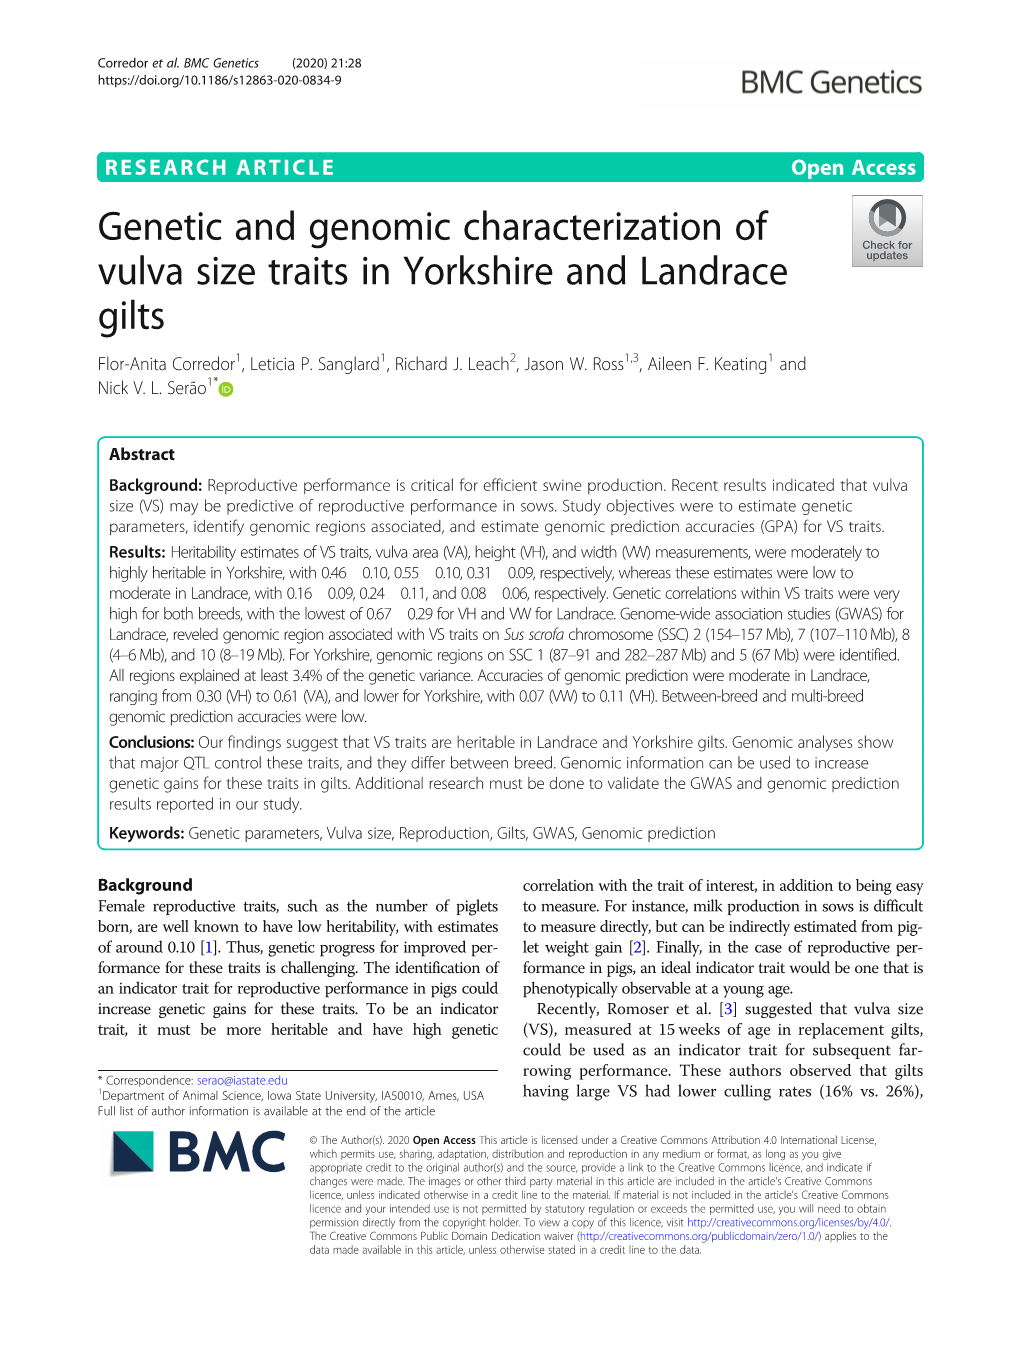 Genetic and Genomic Characterization of Vulva Size Traits in Yorkshire and Landrace Gilts Flor-Anita Corredor1, Leticia P